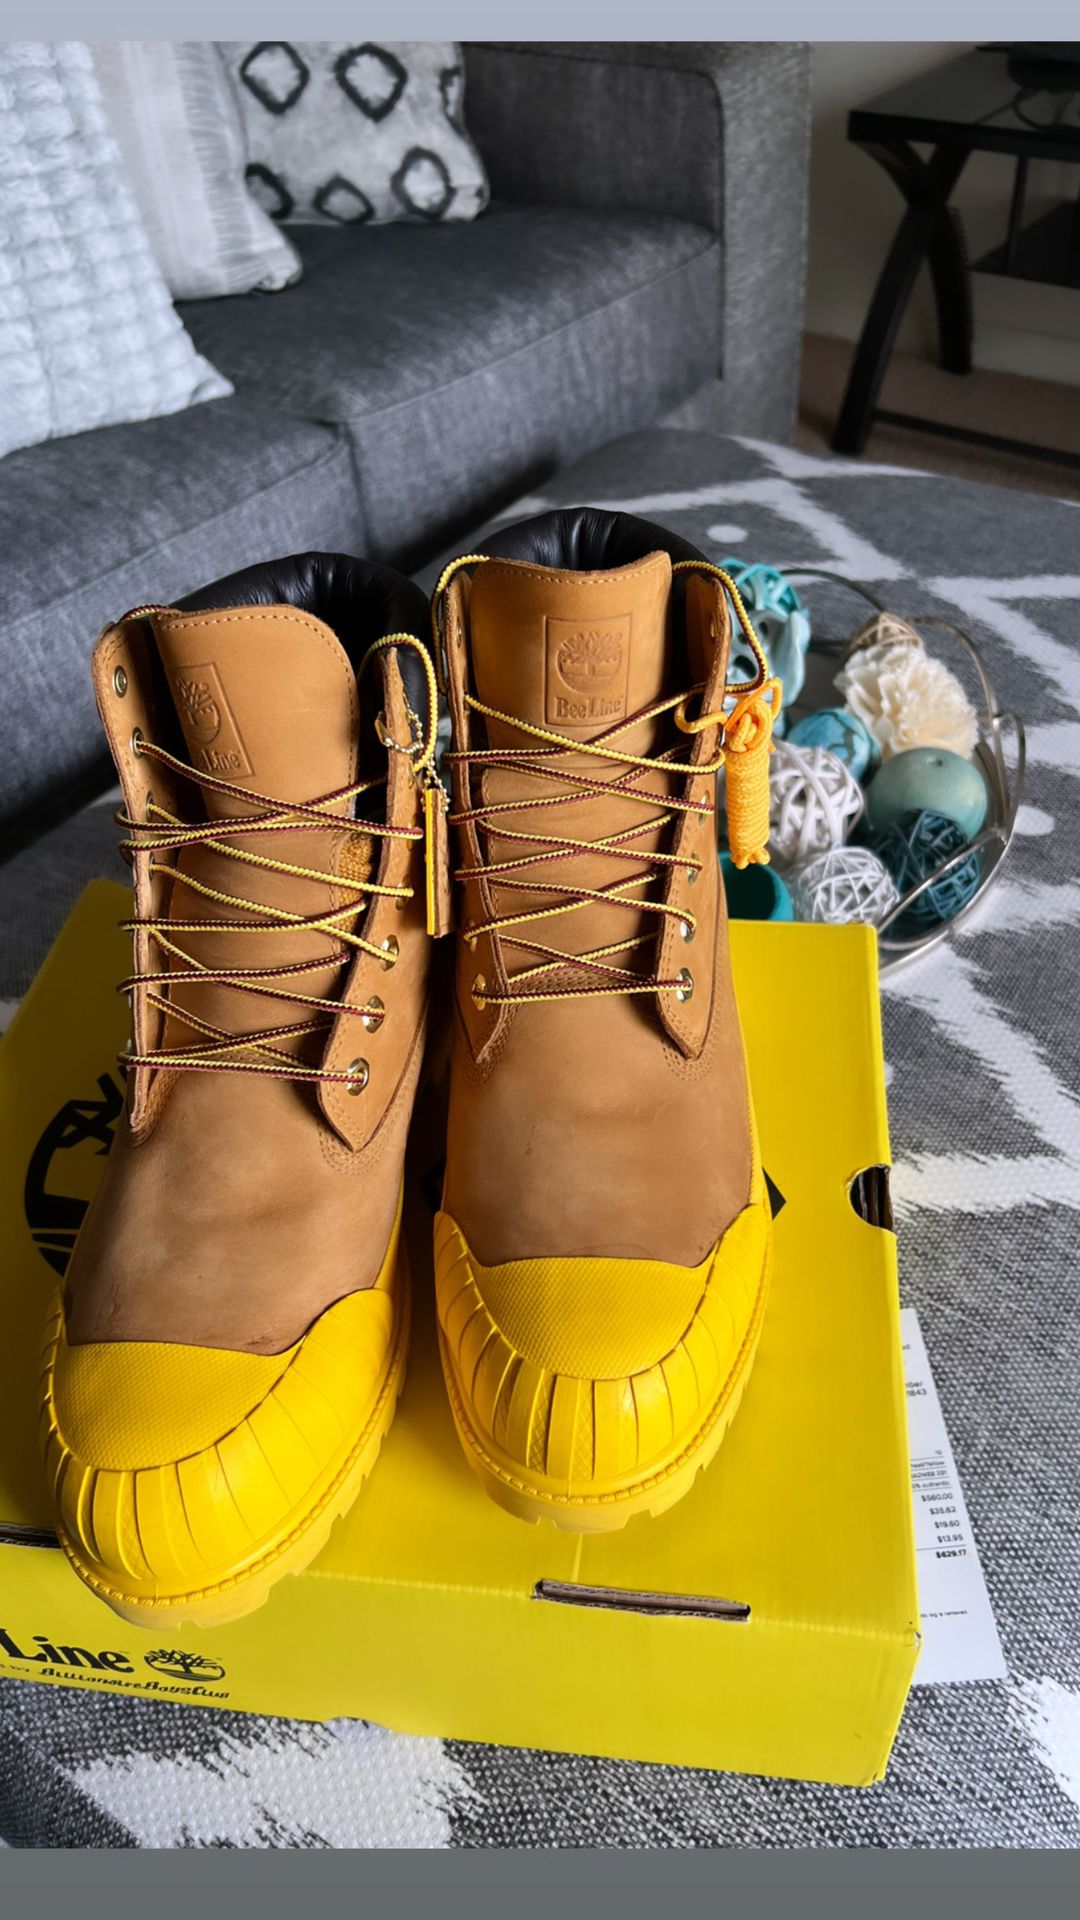 Vacature Inferieur Leninisme Bee Line Timberland (BBC) for Sale in Portsmouth, VA - OfferUp